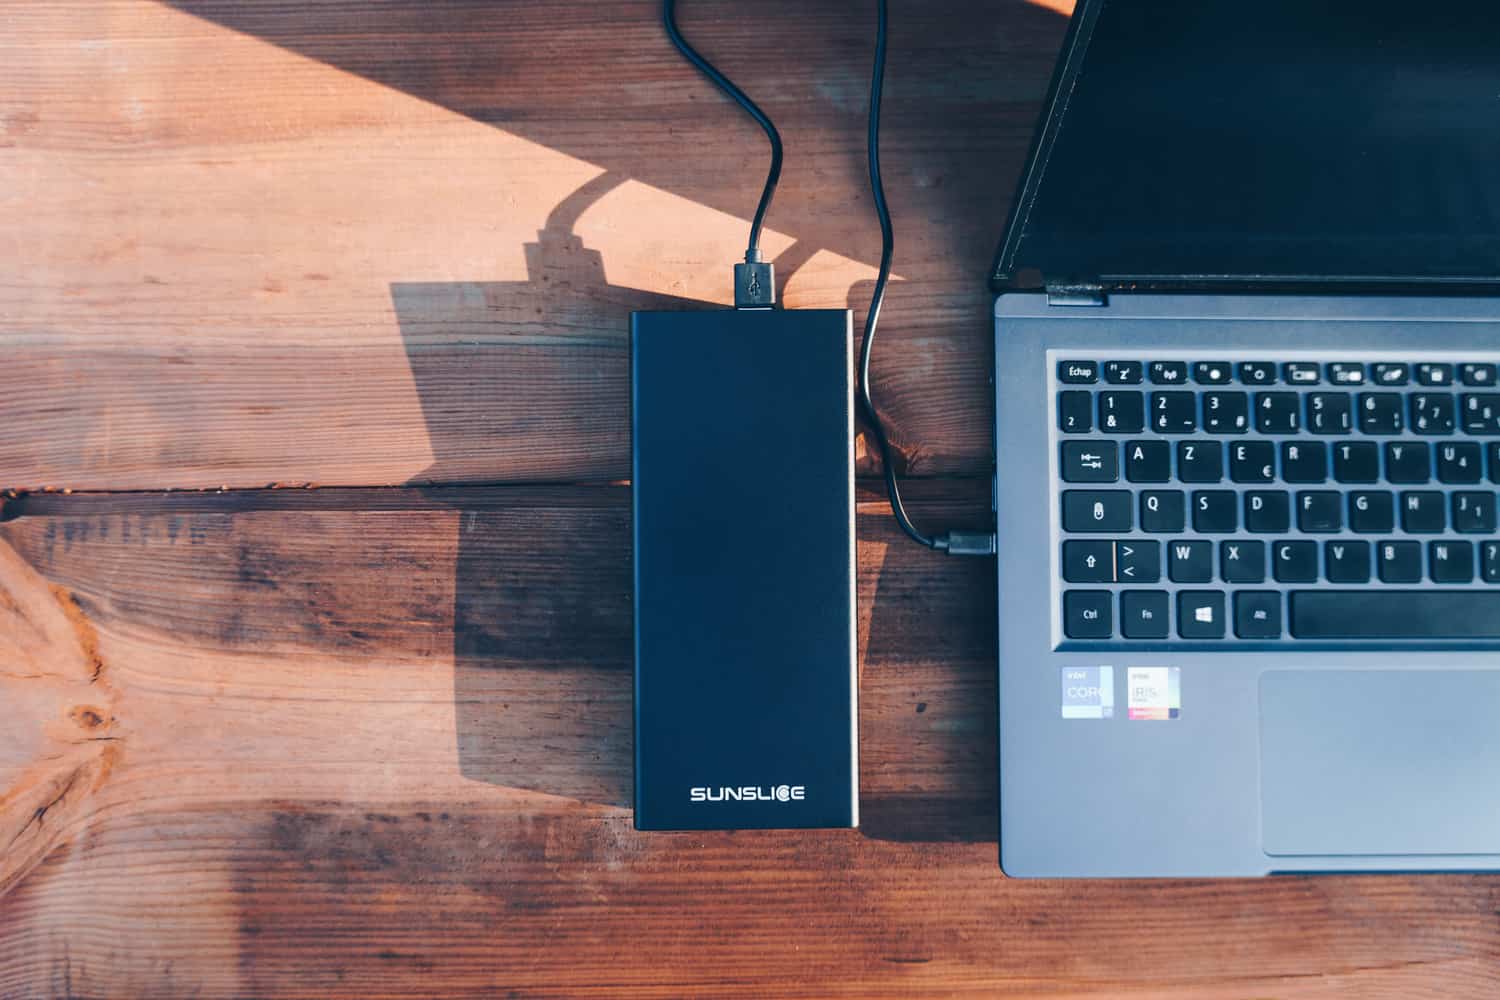 Power bank for laptop - Gravity 100